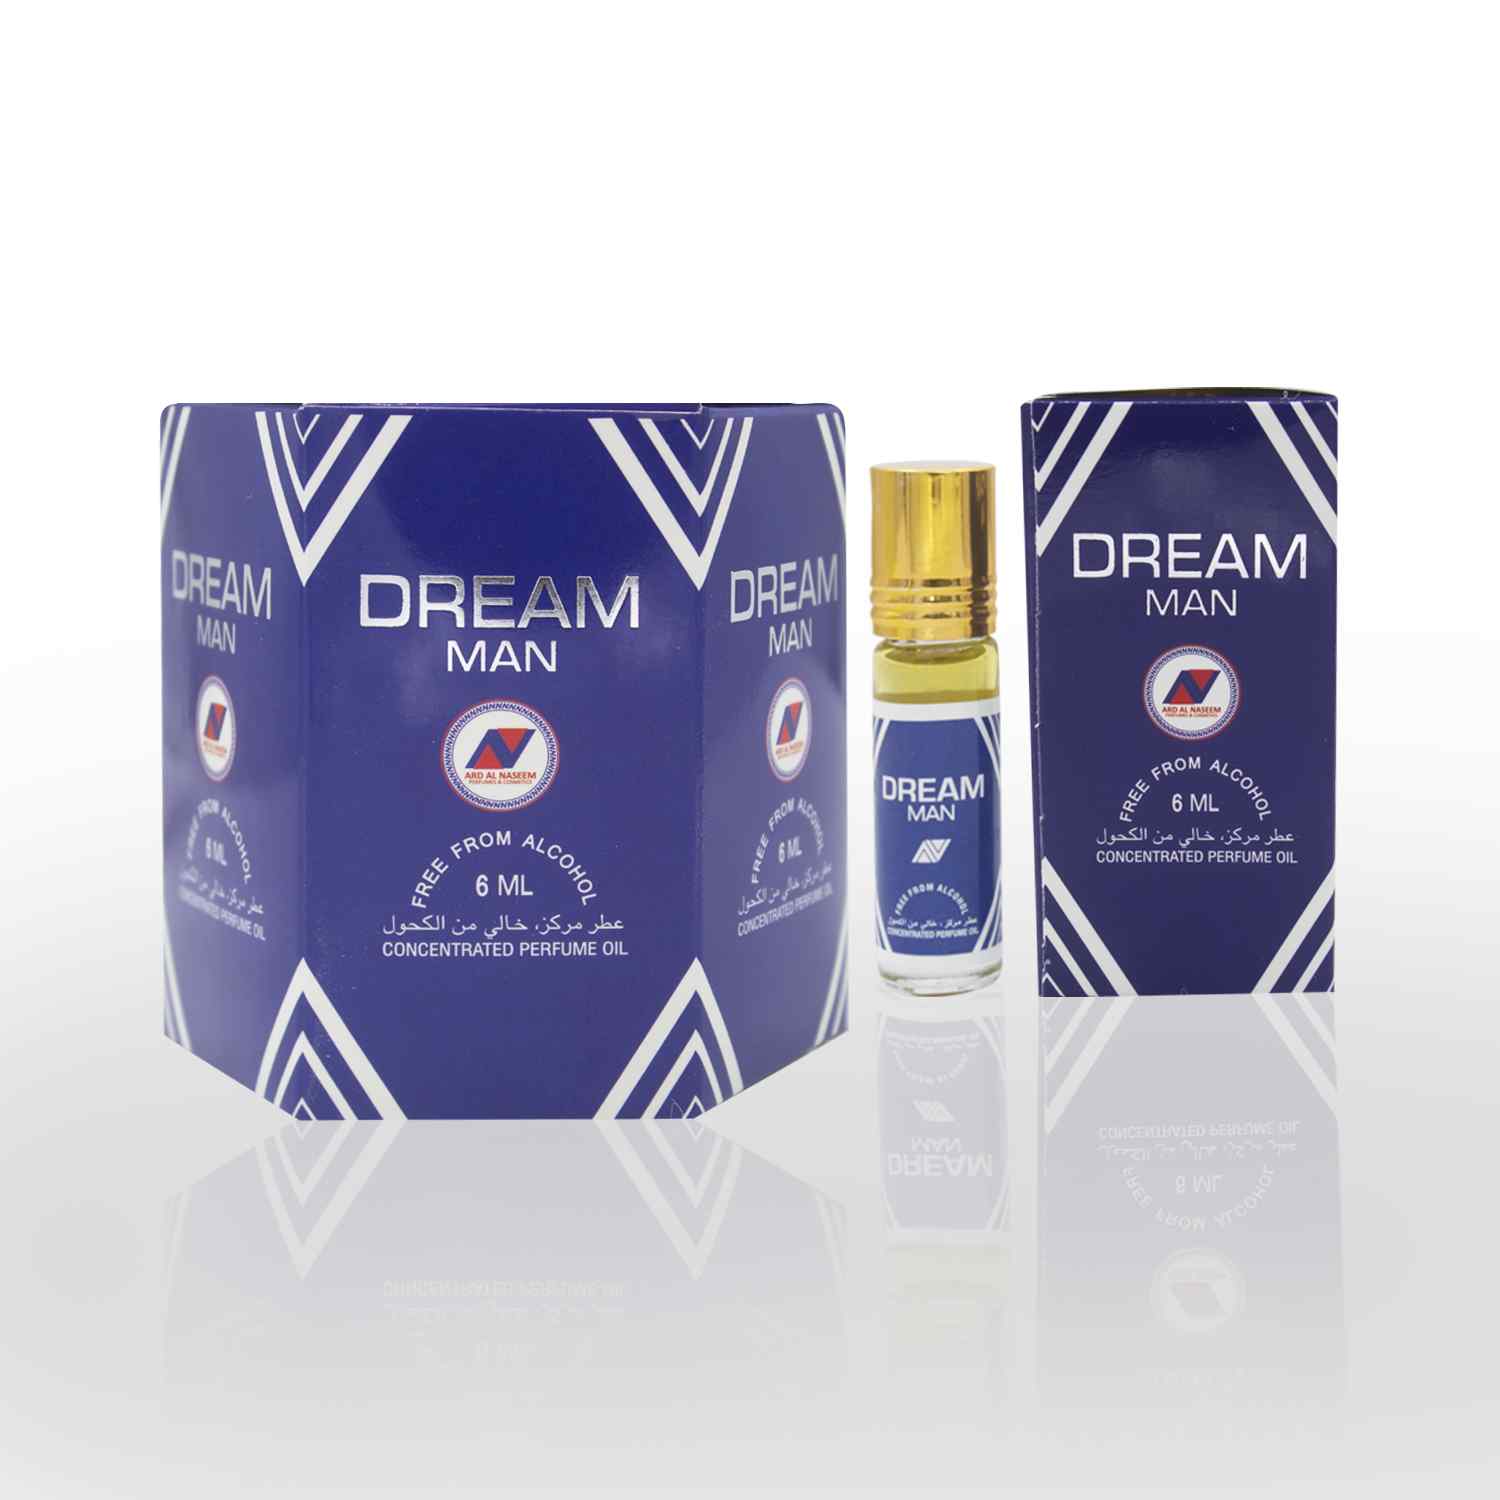 Dream Man 6ml Attar is a concentered perfume oil, free from Alcohol. It is a product of ARD perfumes. Made in UAE